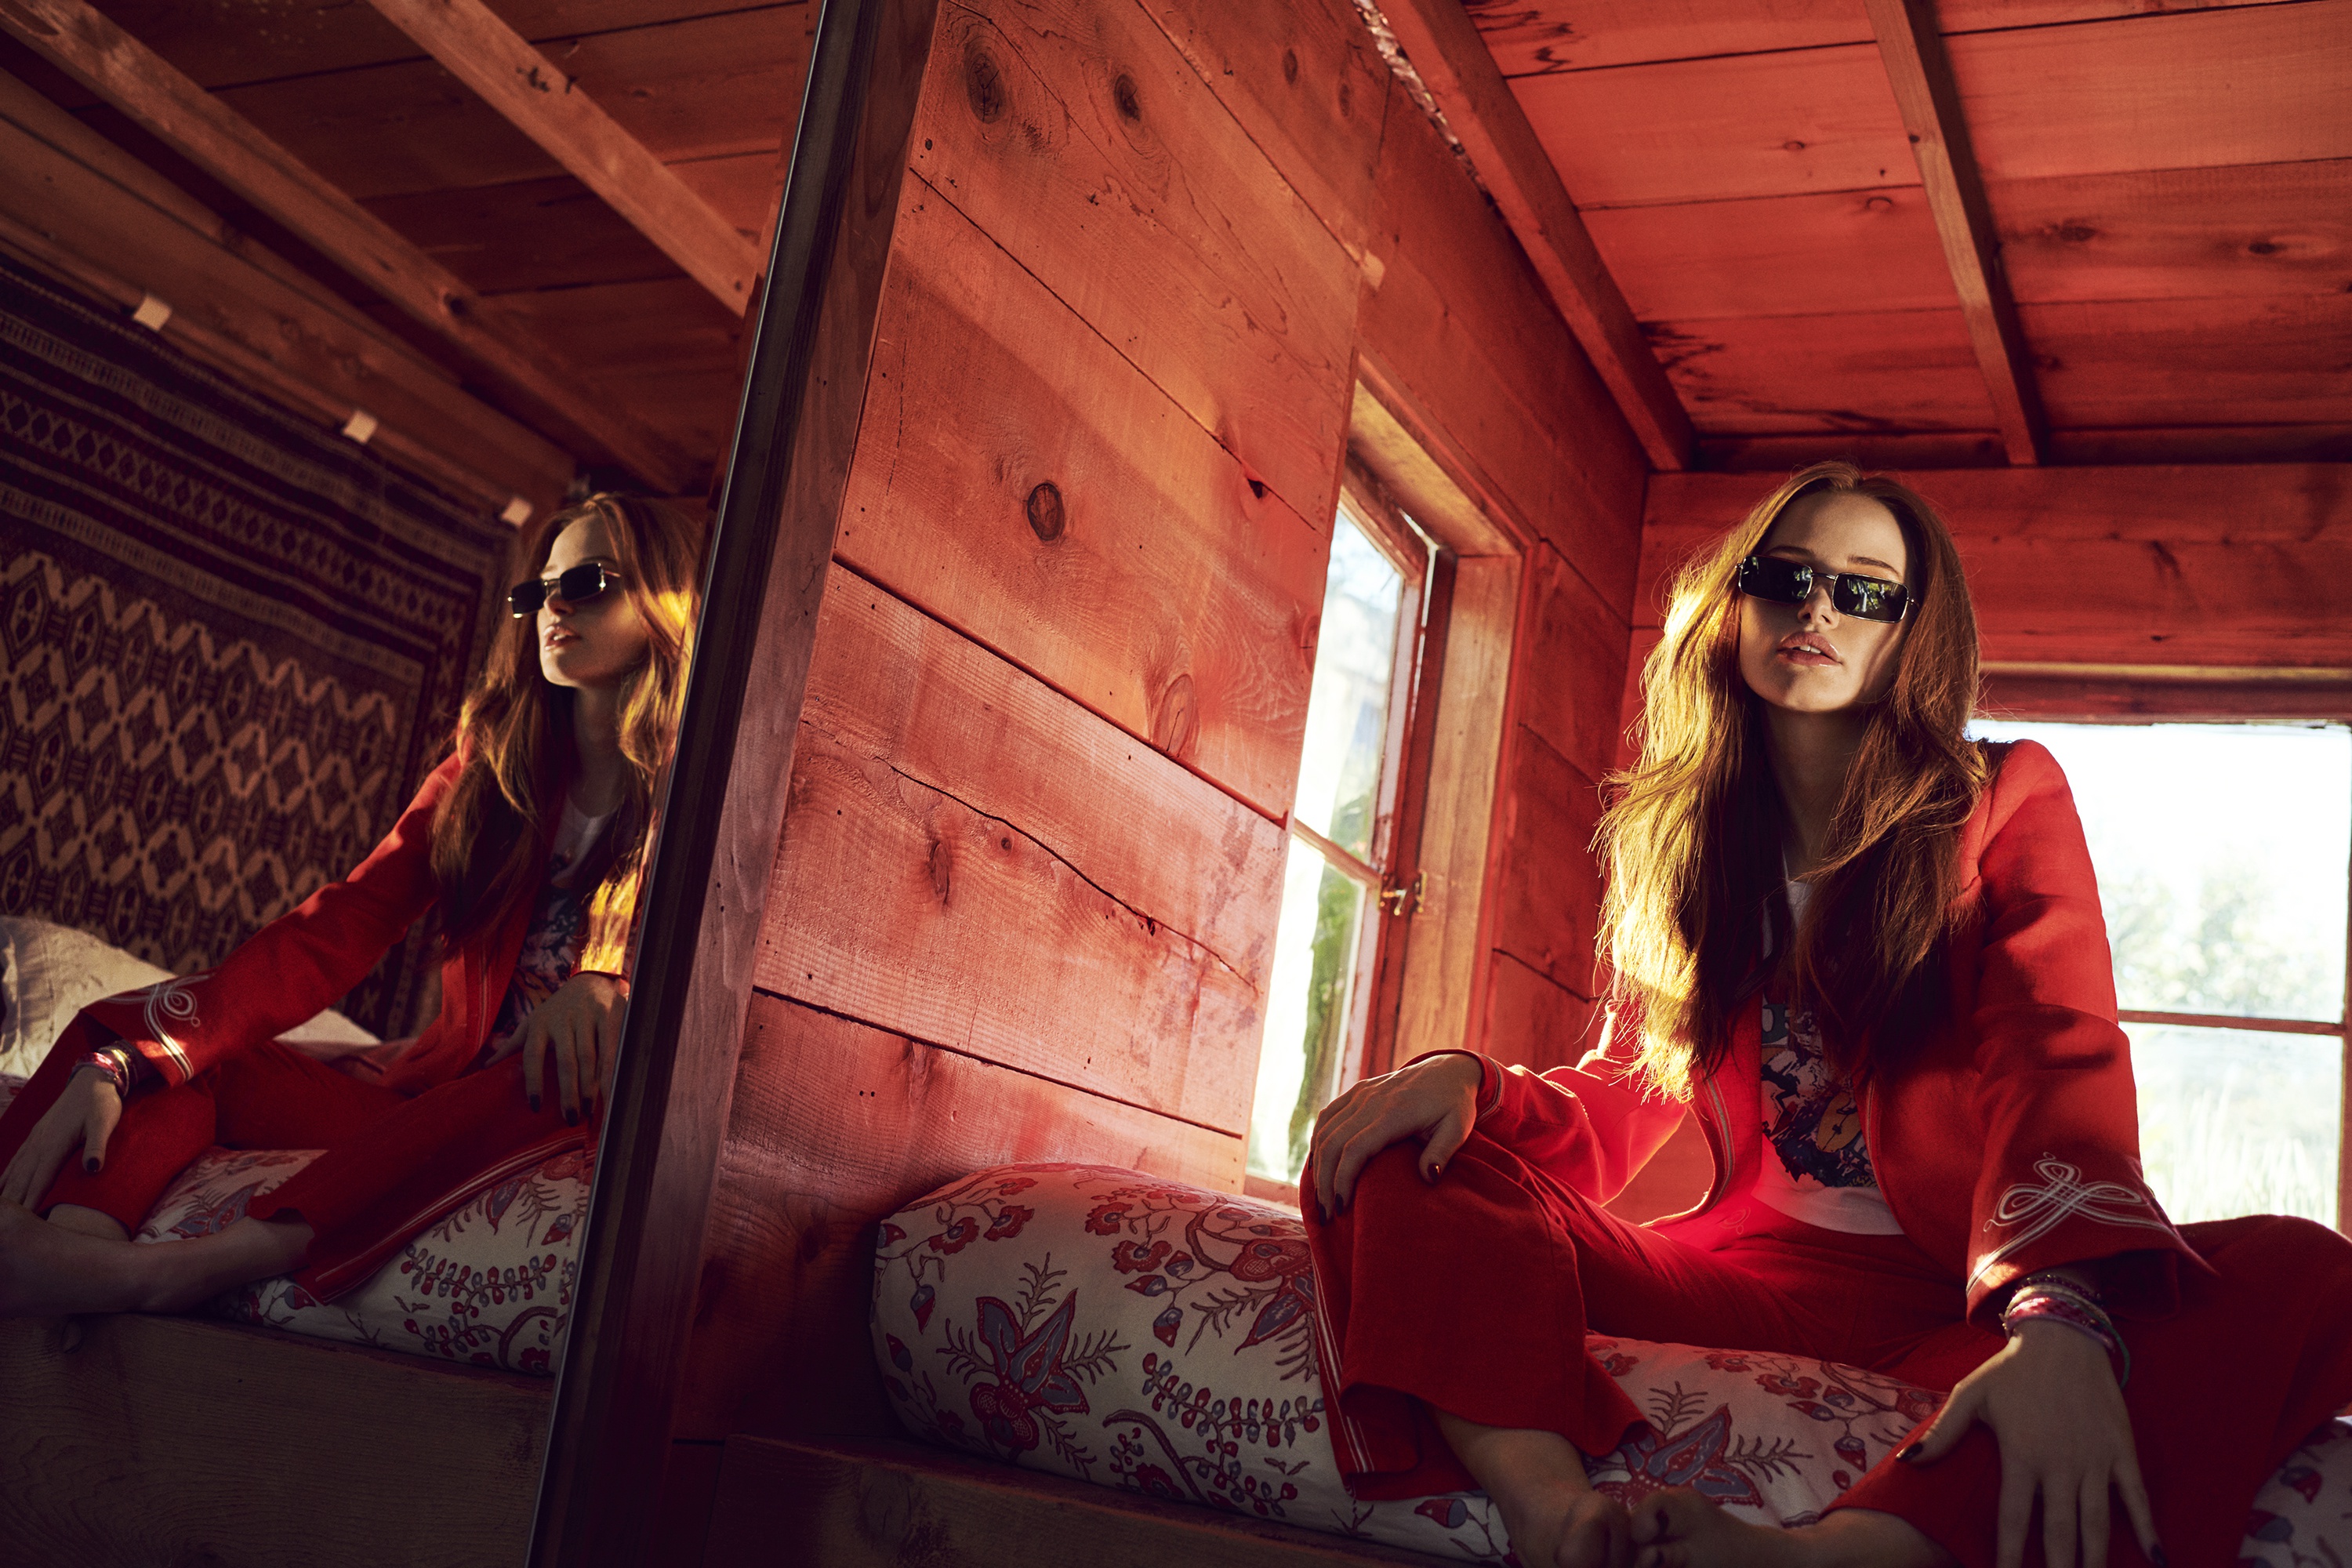 celebrity, madelaine petsch, actress, american, mirror, redhead, reflection, sunglasses